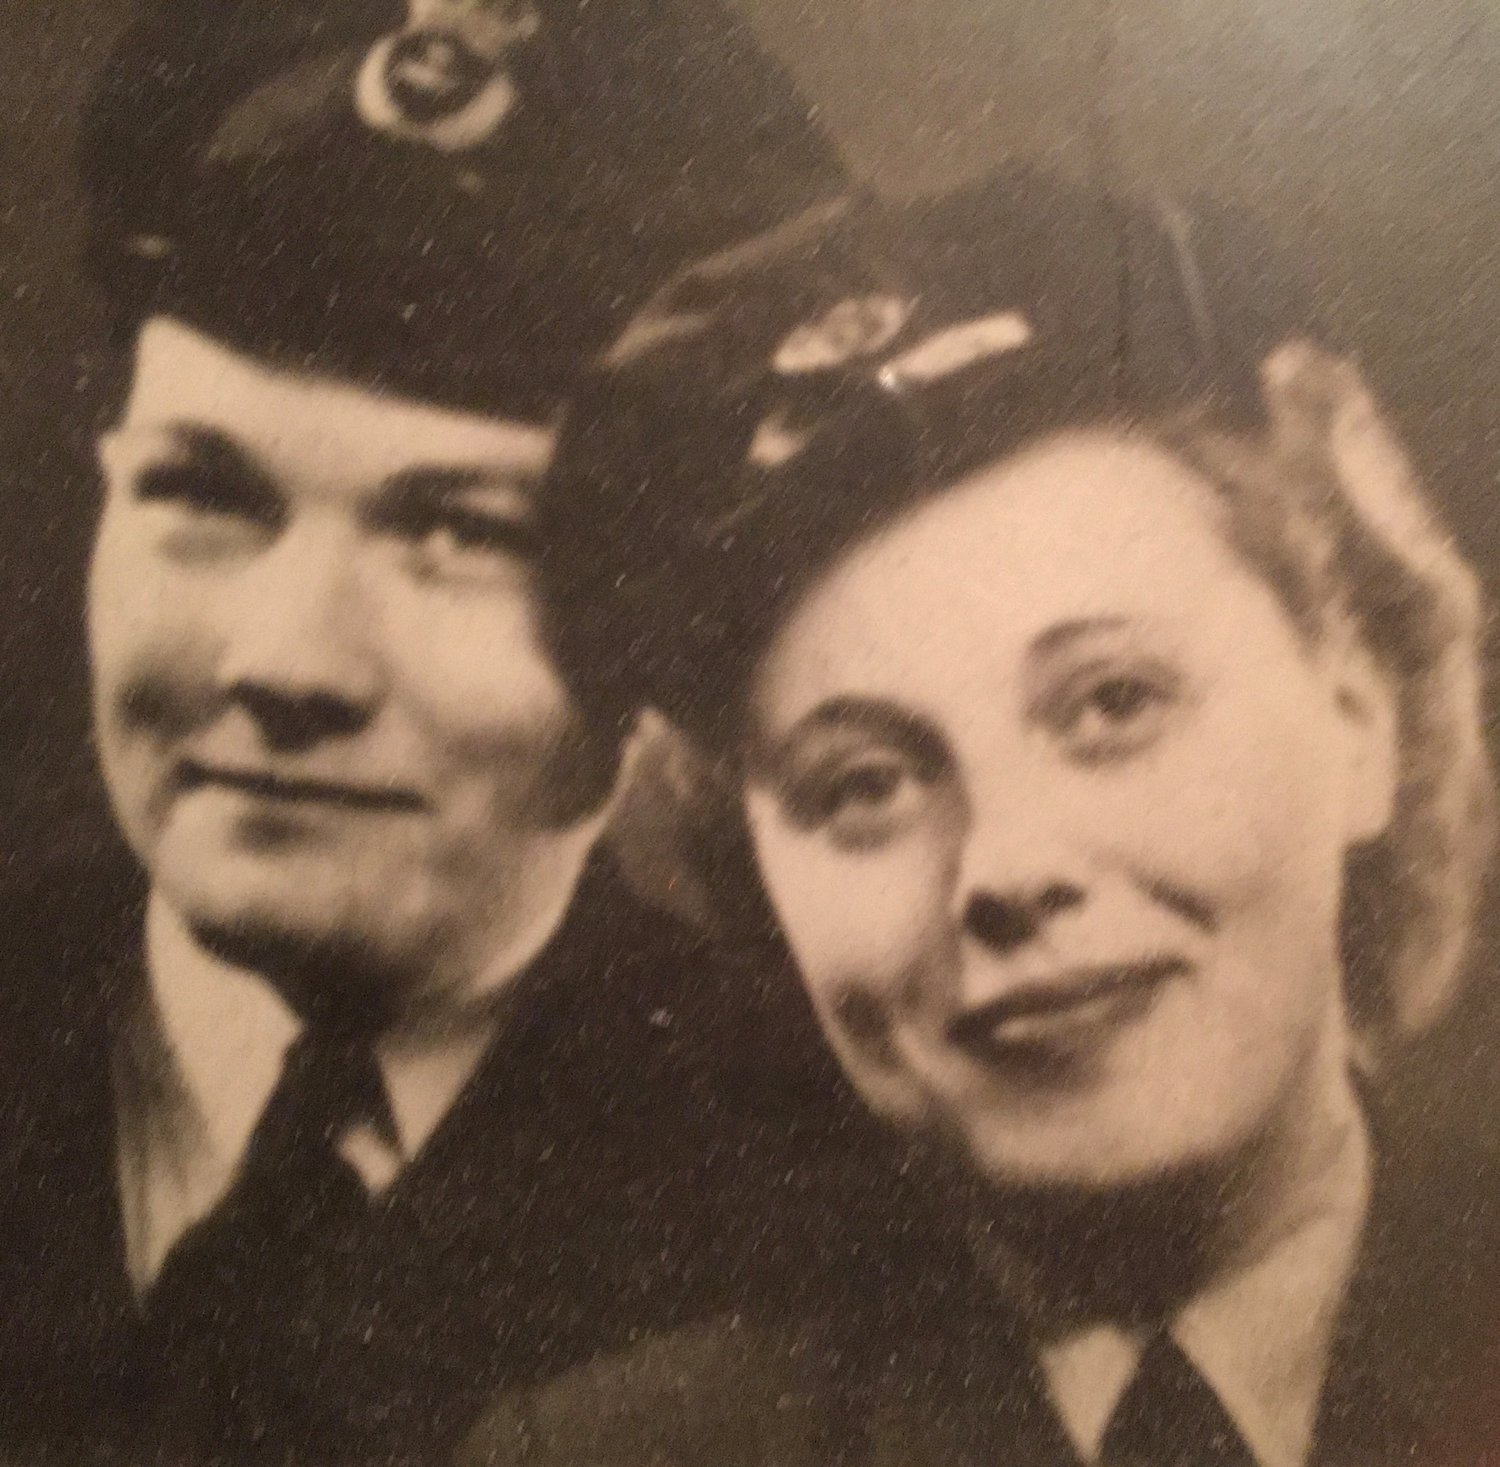 Deeple with her husband, Ted. She served in the Royal Air Force Women’s Auxiliary during World War II after escaping to England from Nazi Germany.